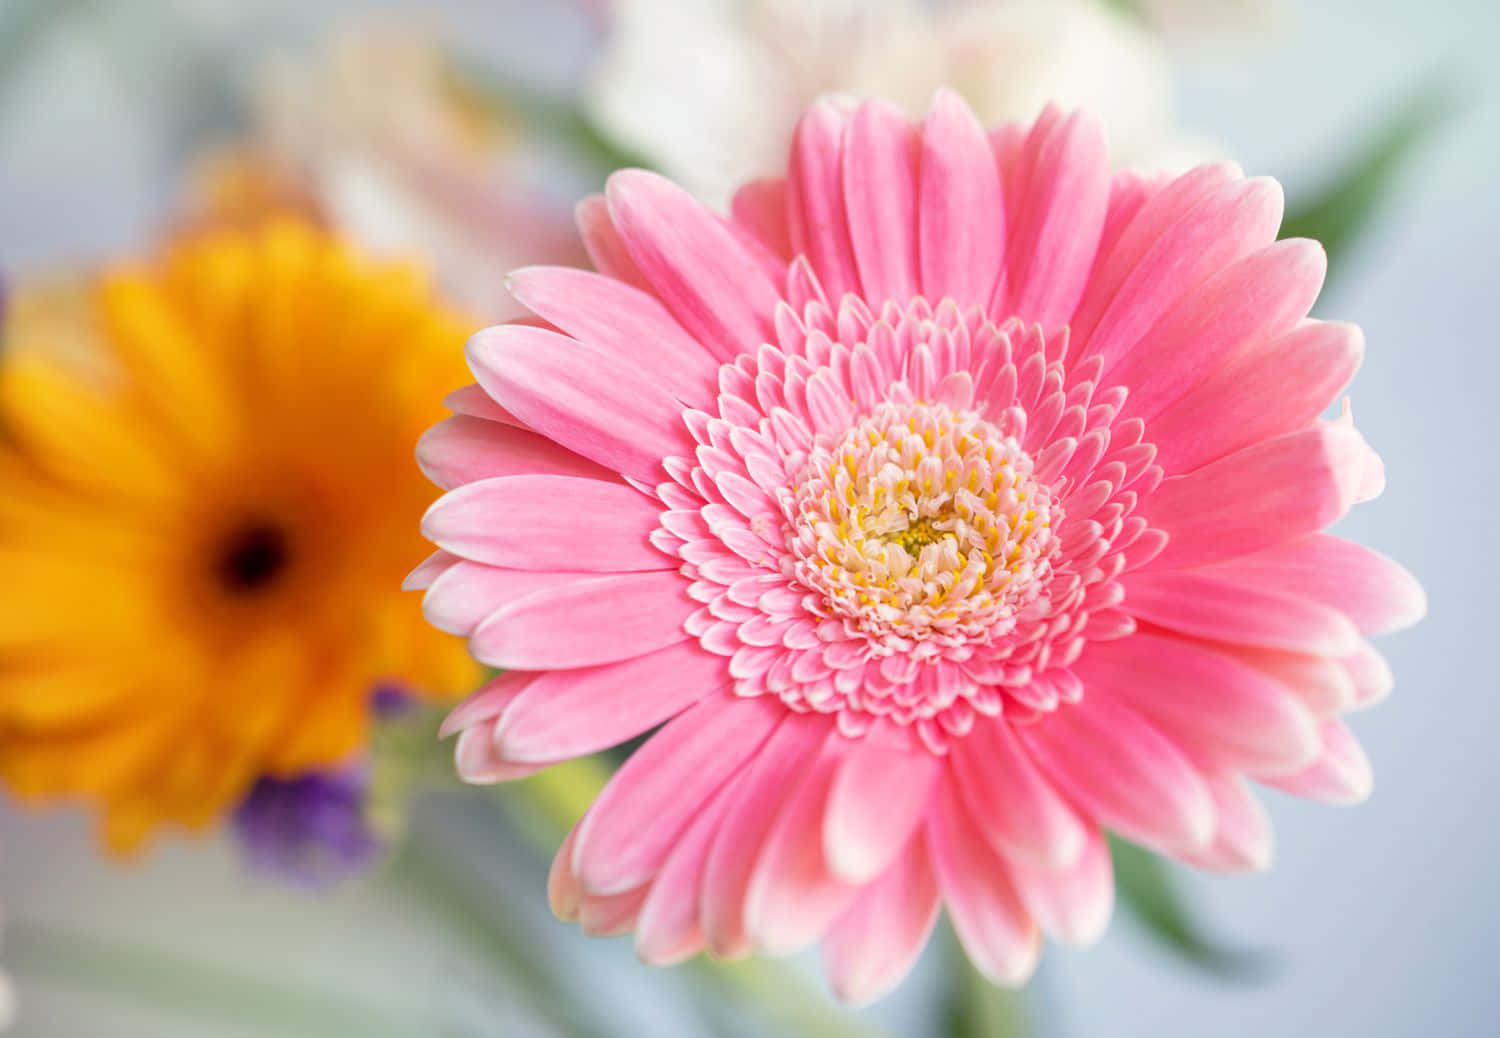 A vibrant bed of beautiful colorful daisies in the sunshine. Wallpaper